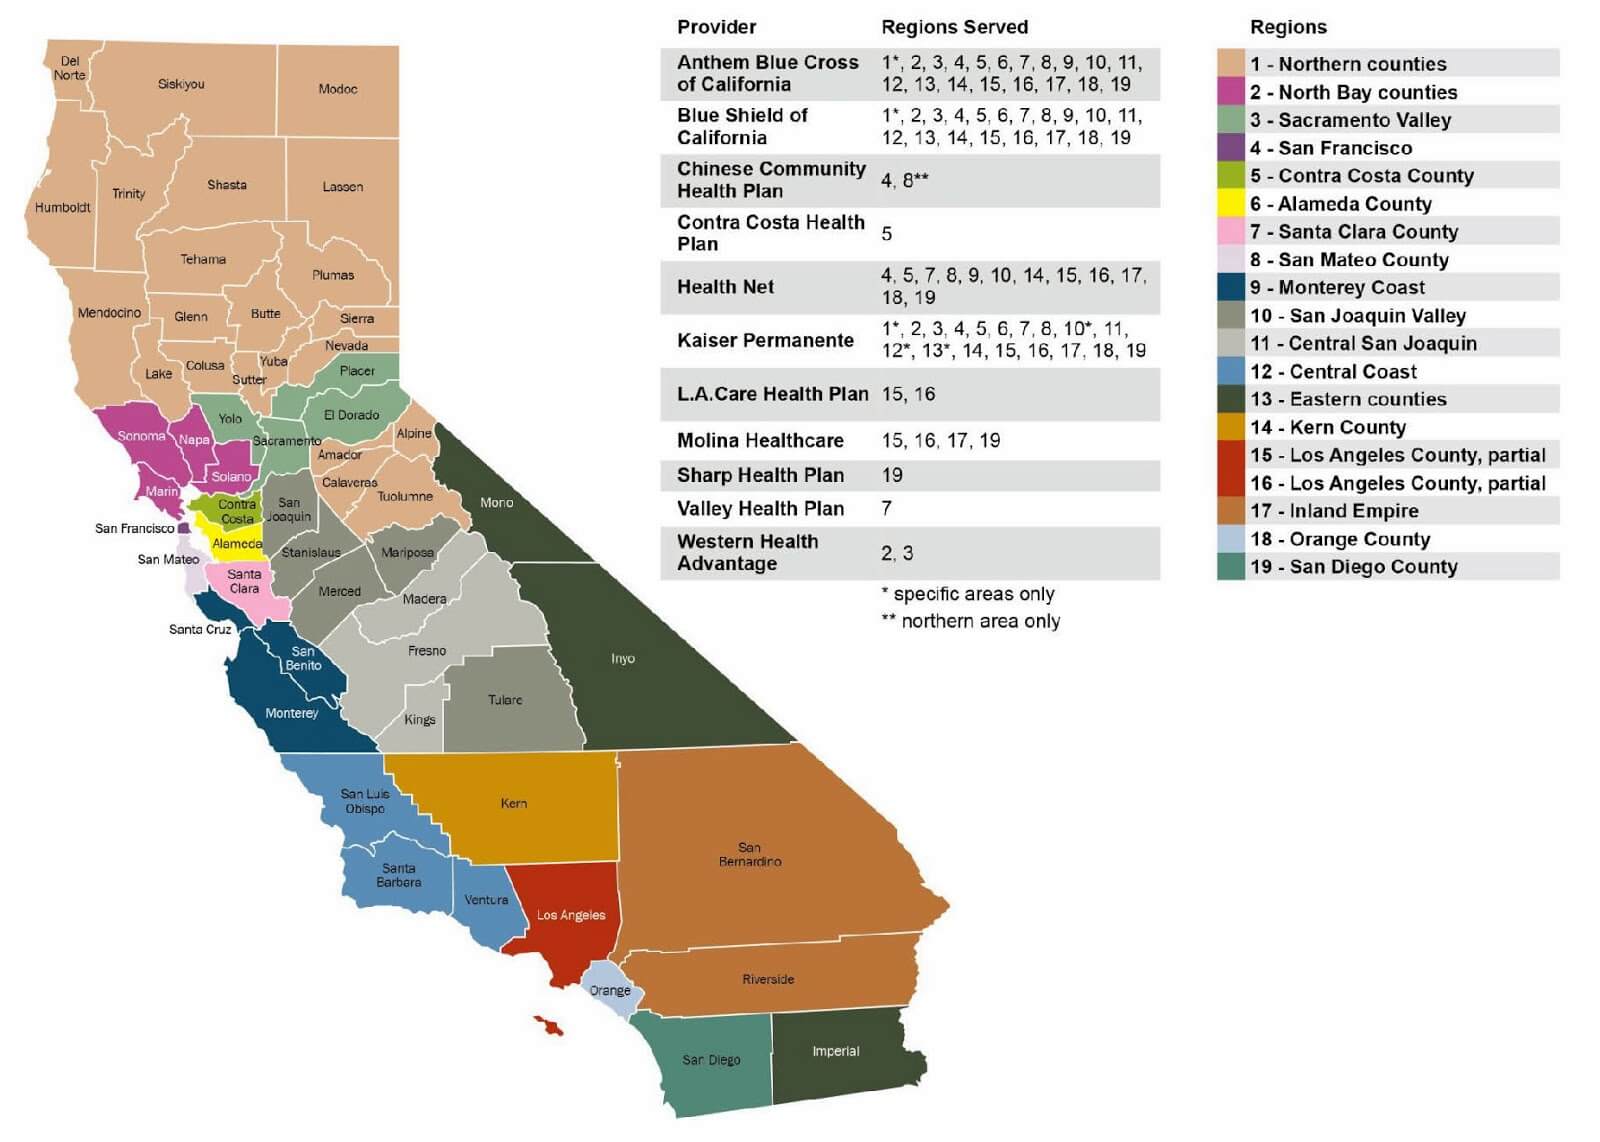 Covered CA regions